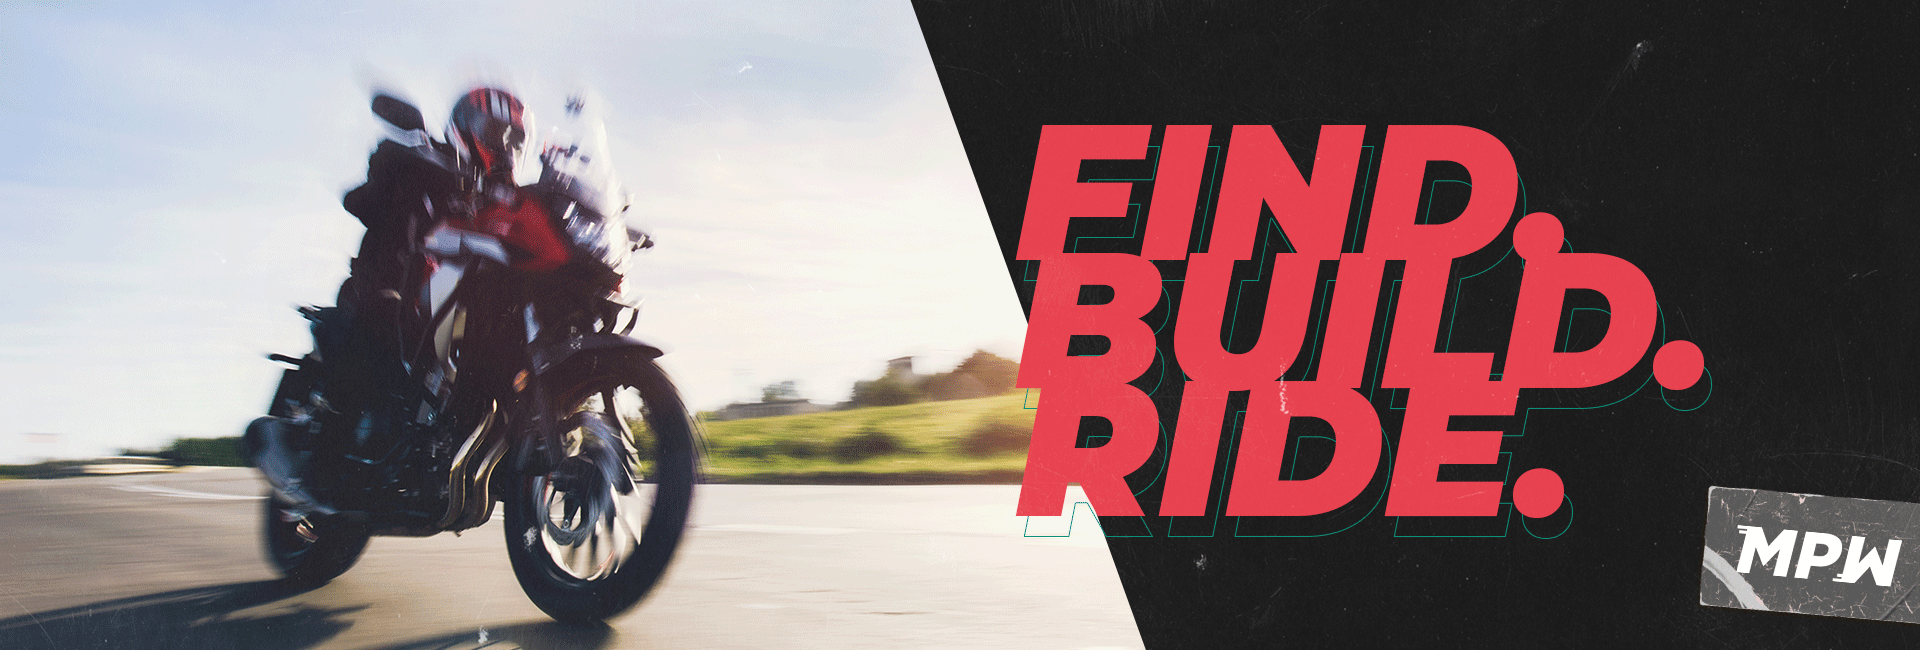 Find. Build. Ride. Motorcycle Parts Warehouse graphic.